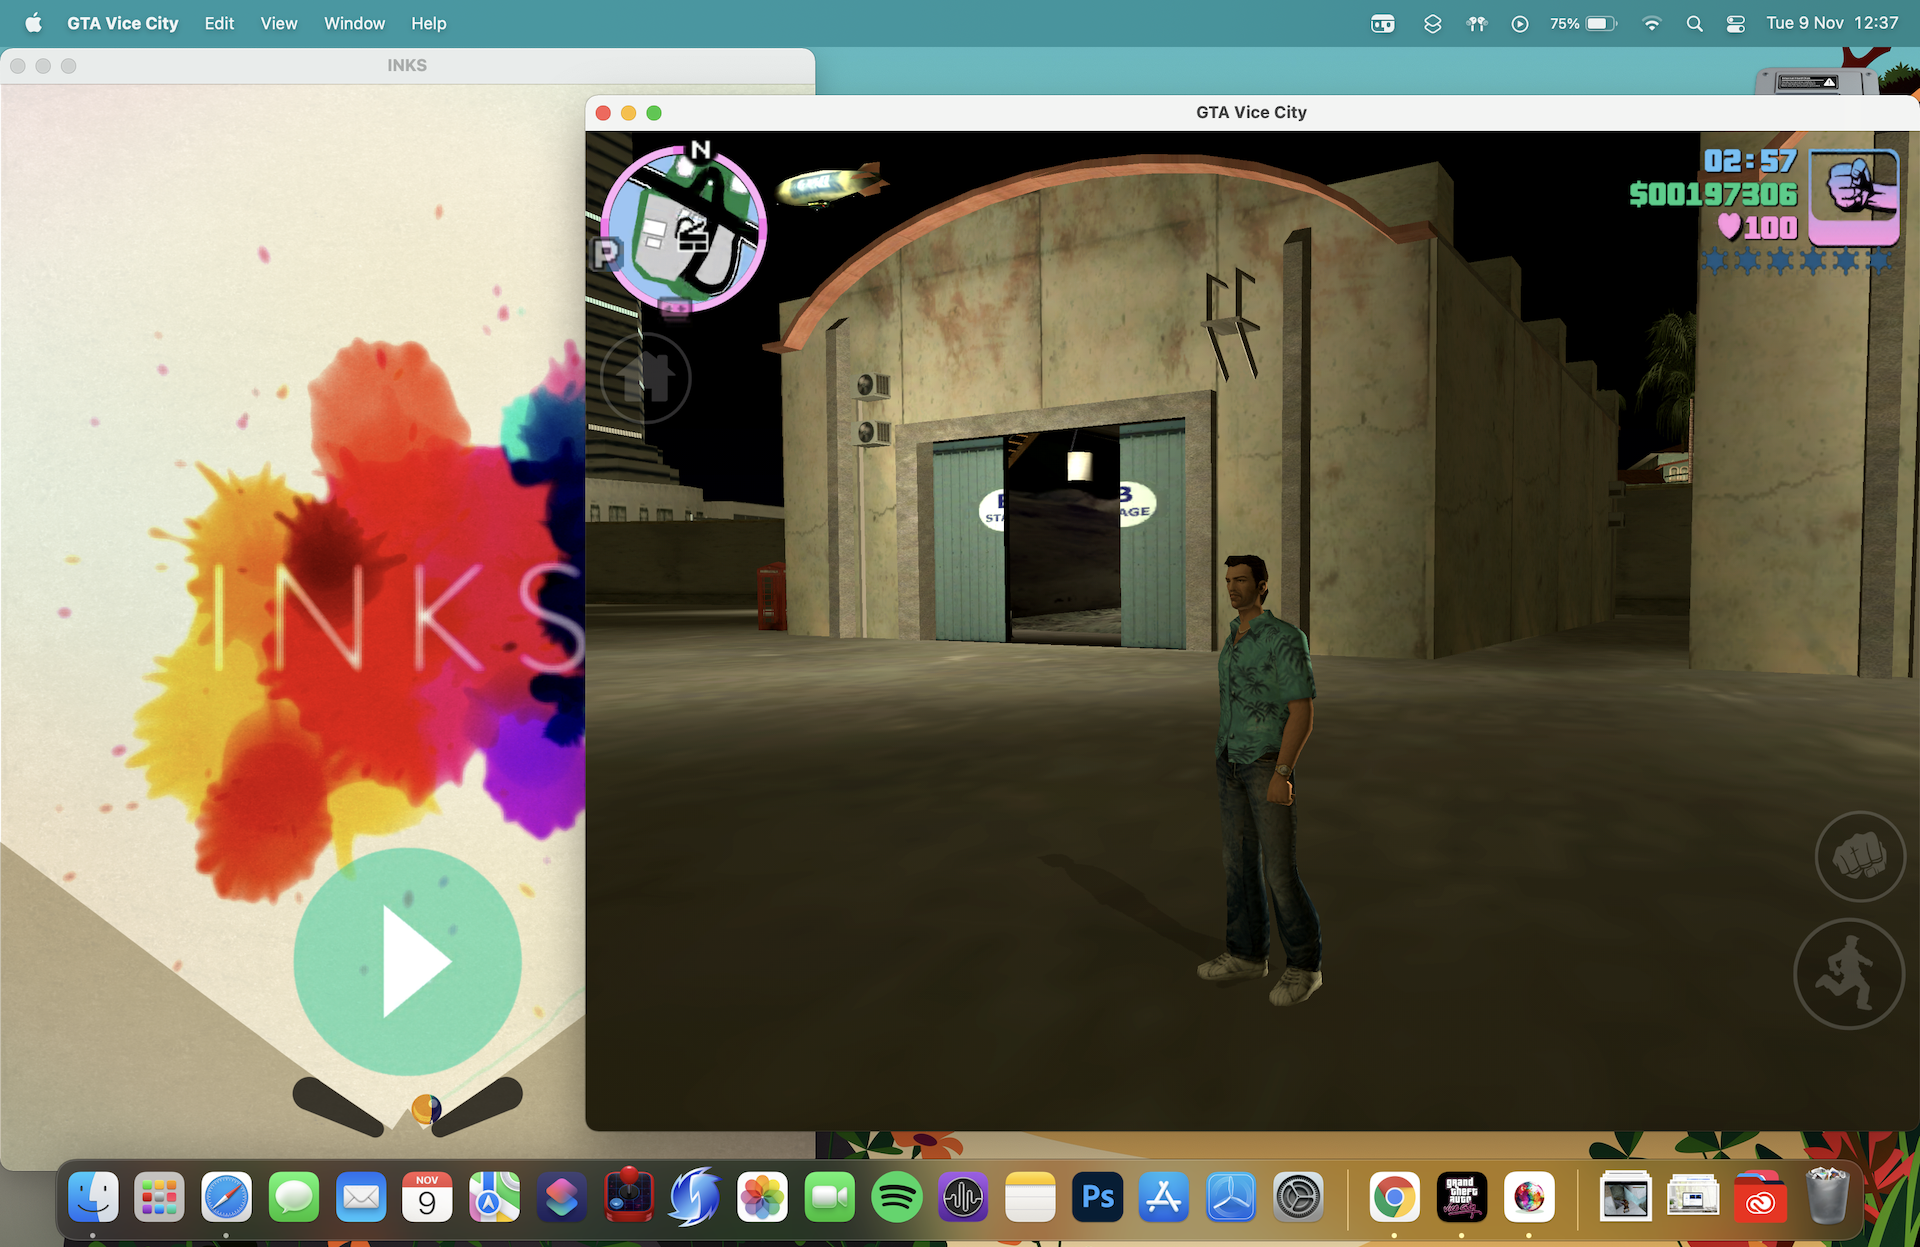 Two iOS apps running in macOS 12 Monterey